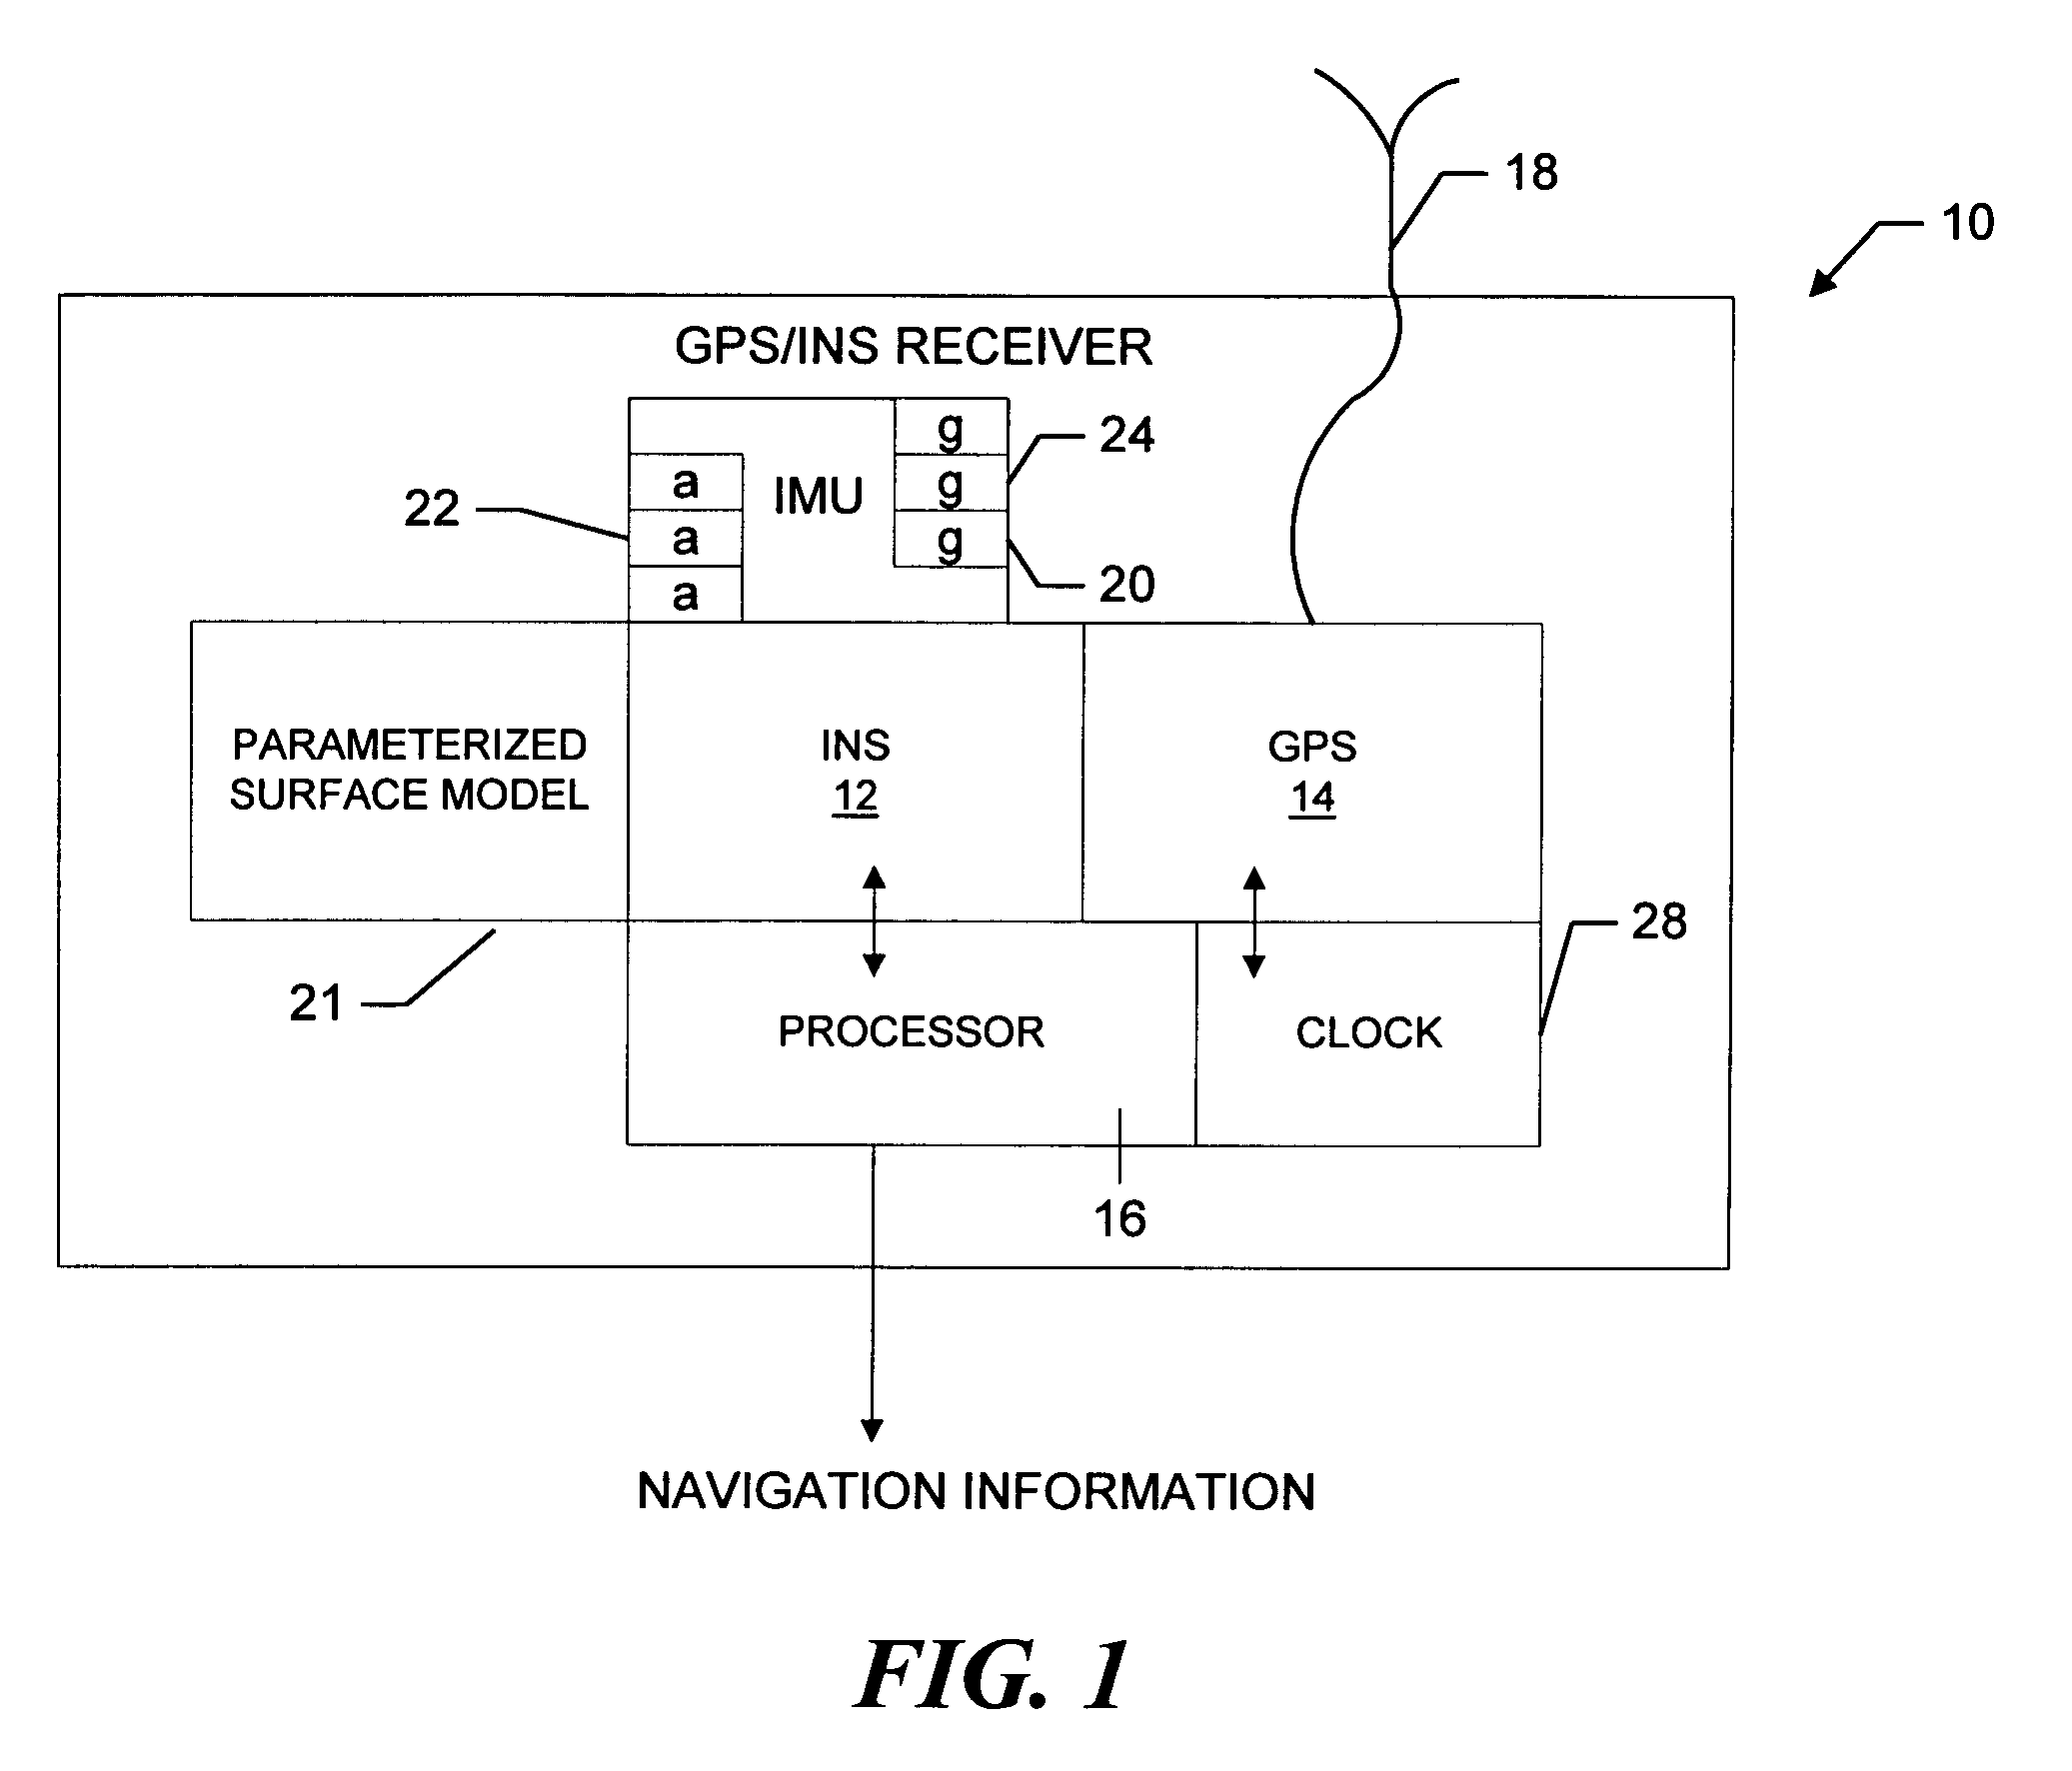 Inertial GPS navigation system using injected alignment data for the inertial system